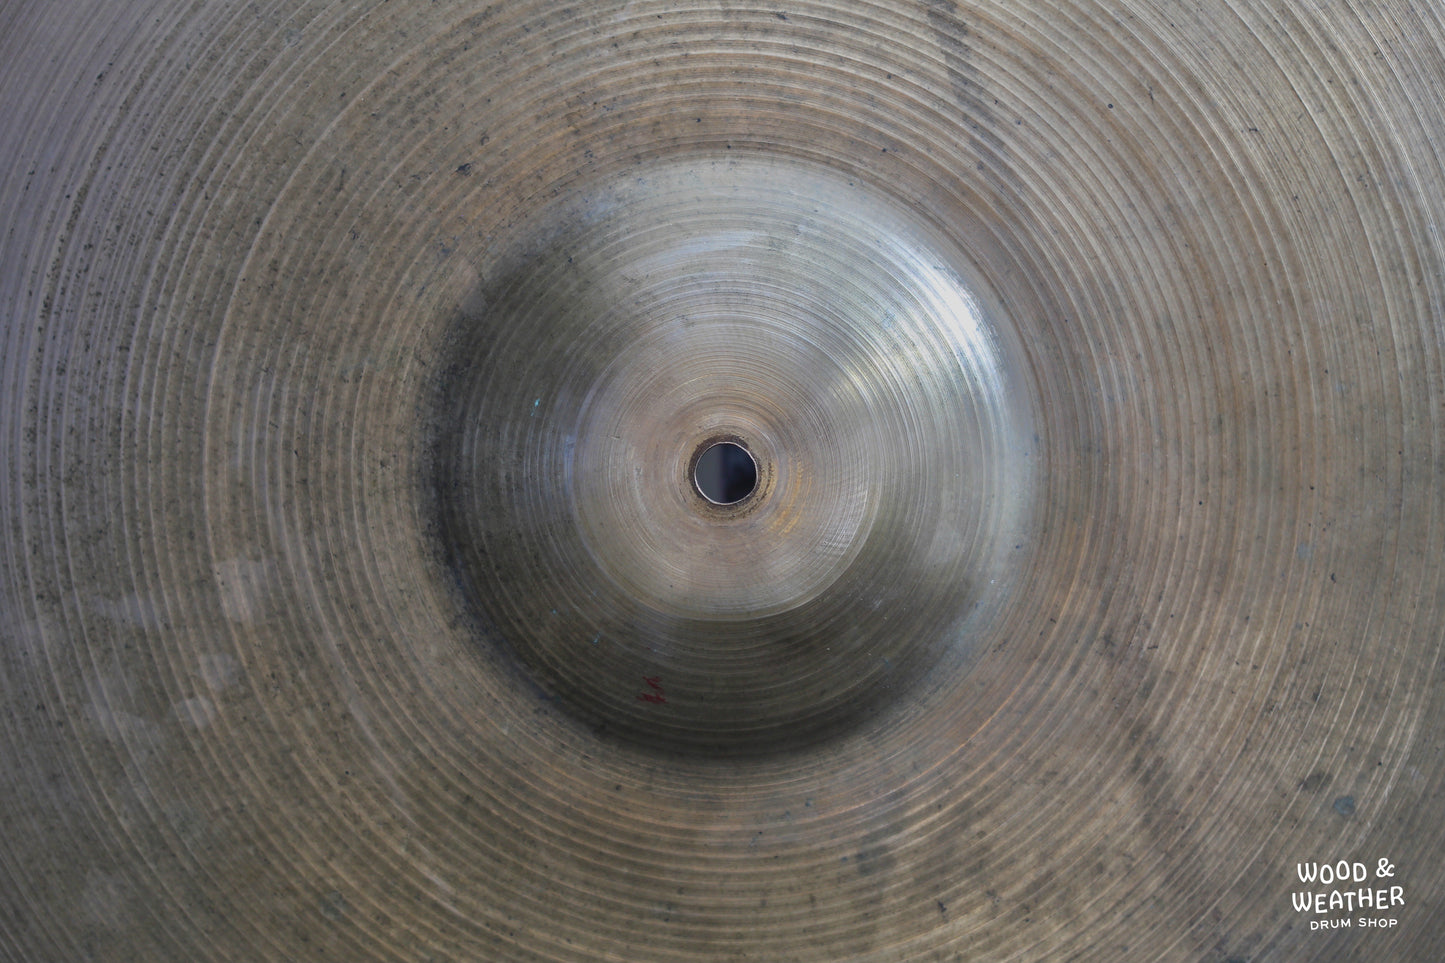 1950s A. Zildjian 22" "Large Stamp" Ride Cymbal with Rivets 2810g